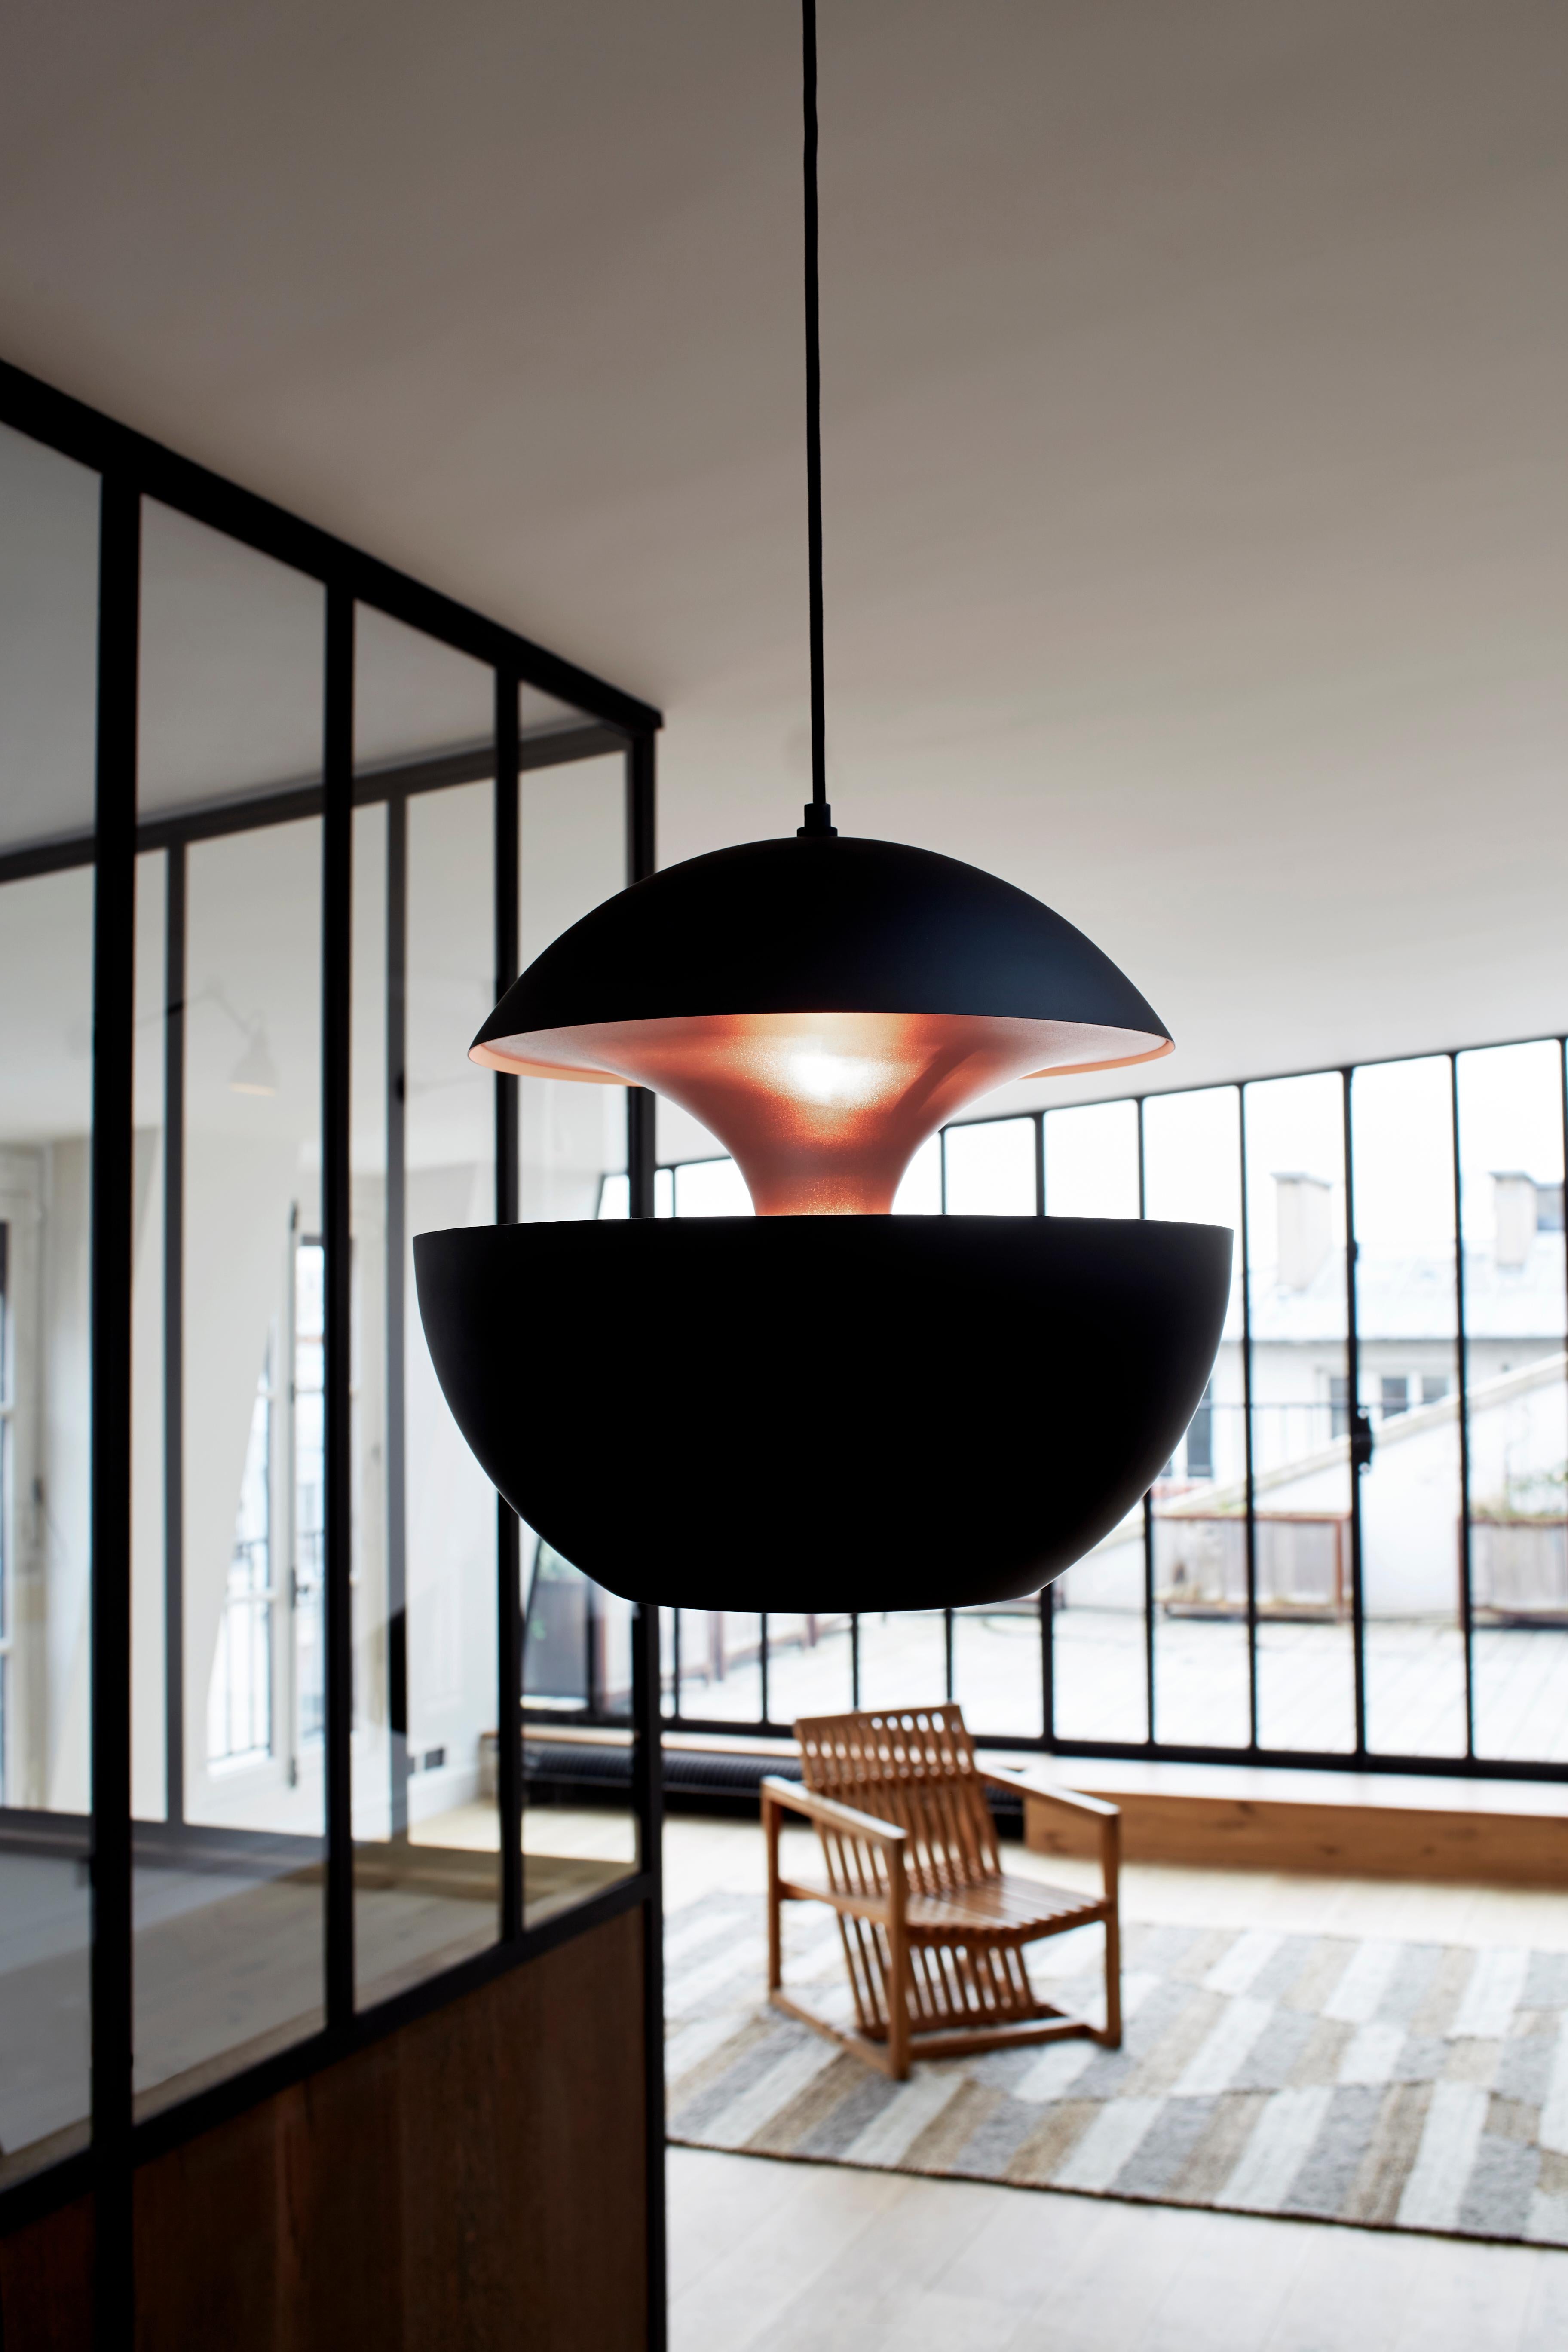 Here comes the sun extra large black and copper pendant lamp by Bertrand Balas
Dimensions: D 45 x H 45 cm
Materials: Aluminum
Available in different sizes and colors.

All our lamps can be wired according to each country. If sold to the USA it